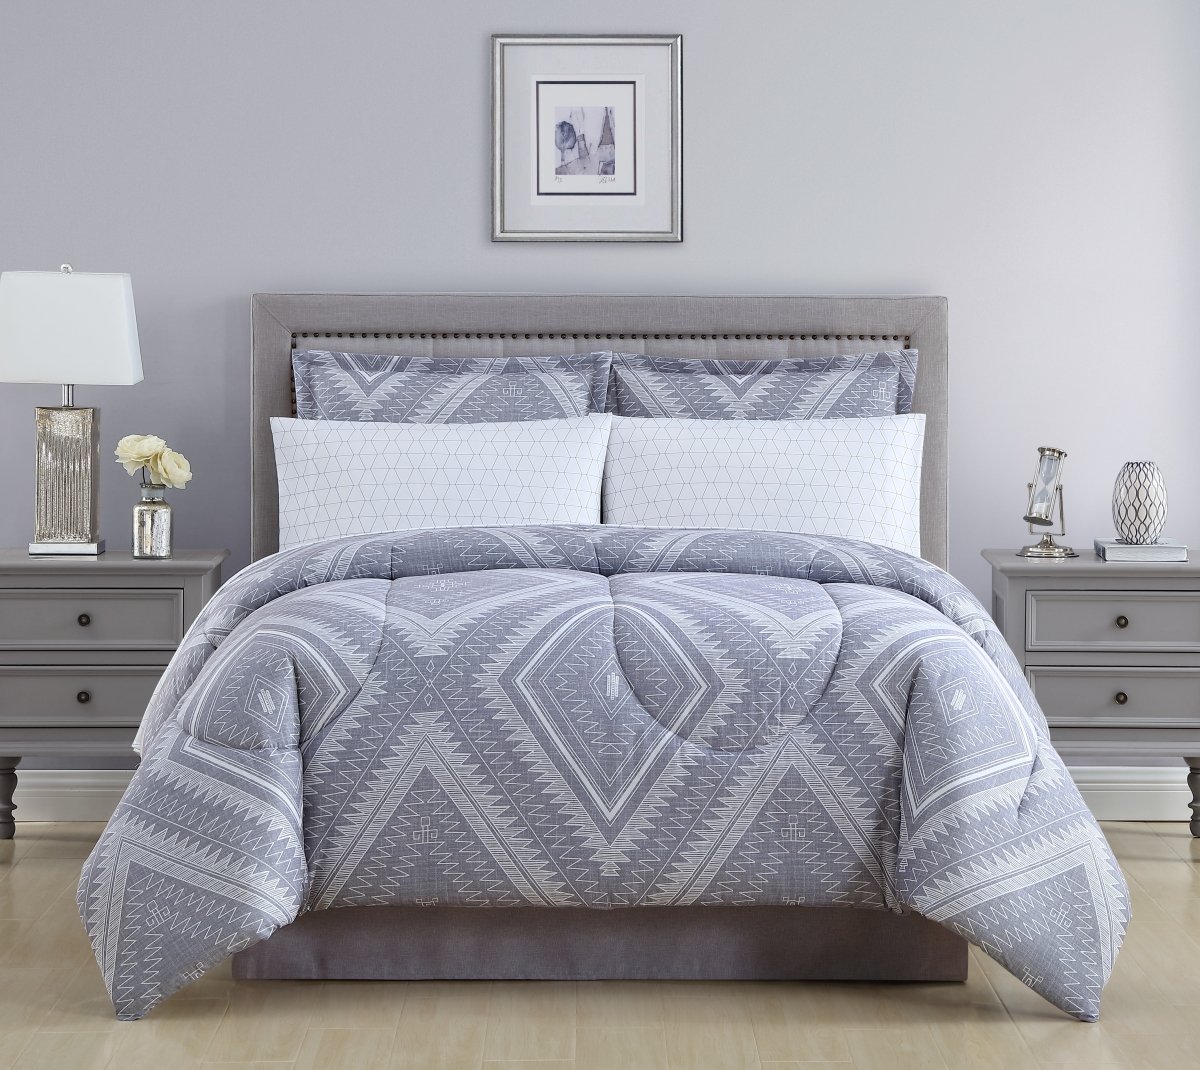 19331802bb-mul Aileen Bed In A Bag Comforter Set, Grey - Full Size, 8 Piece